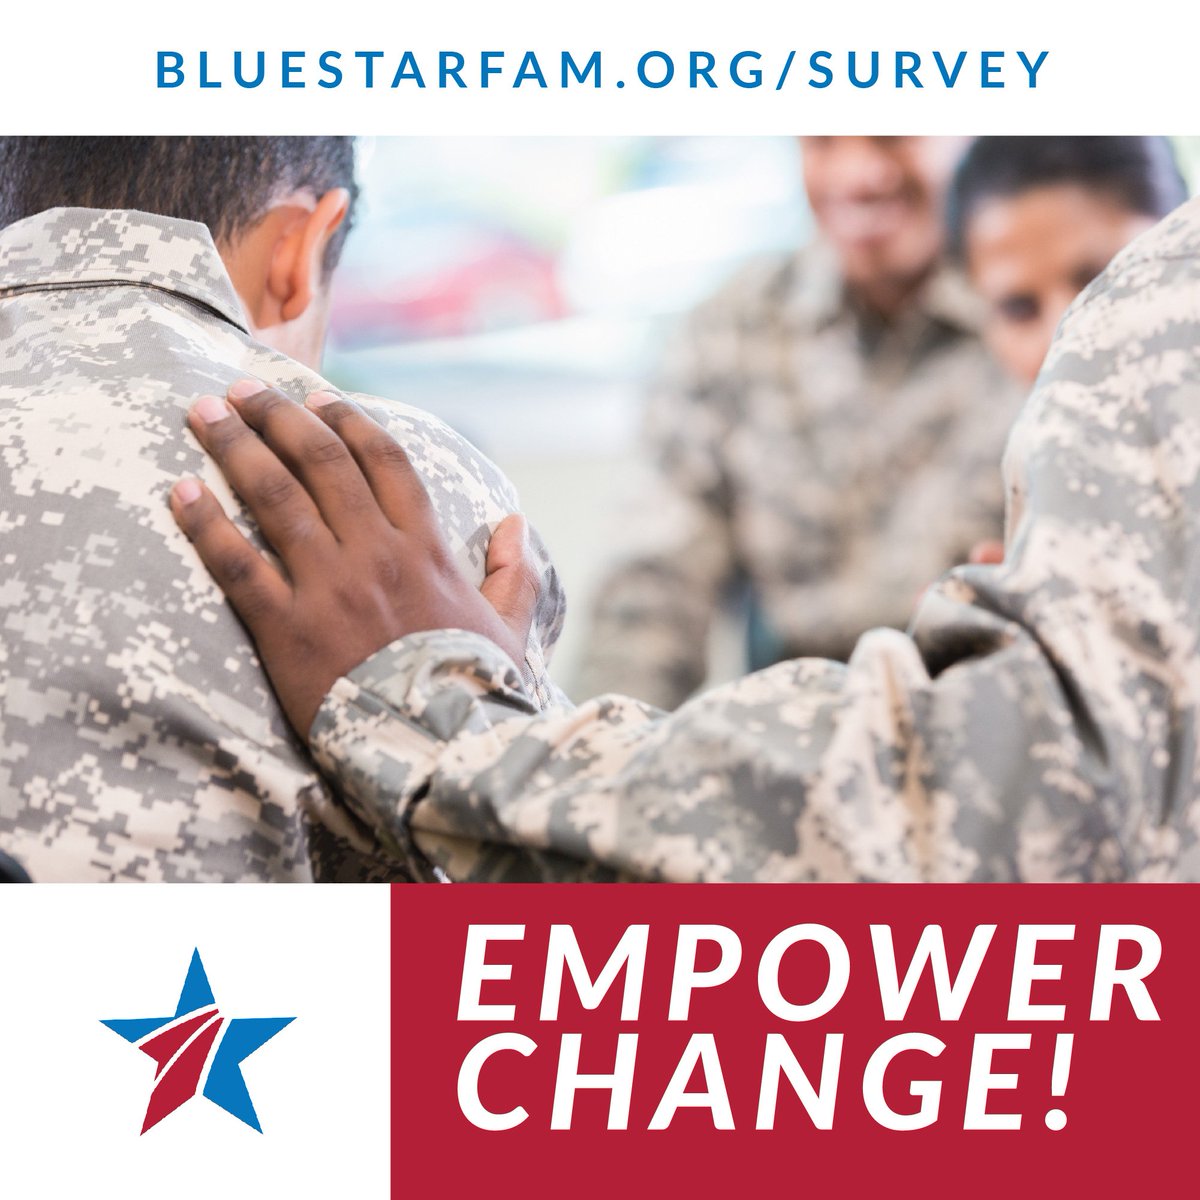 The 2019 Blue Star Families Military Family Lifestyle Survey is now live until June 14, 2019! Take the #BSFSurvey and make your voice heard today! ow.ly/CoHa50uvTNu #military #milSpouse #Survey #ShareYourStory